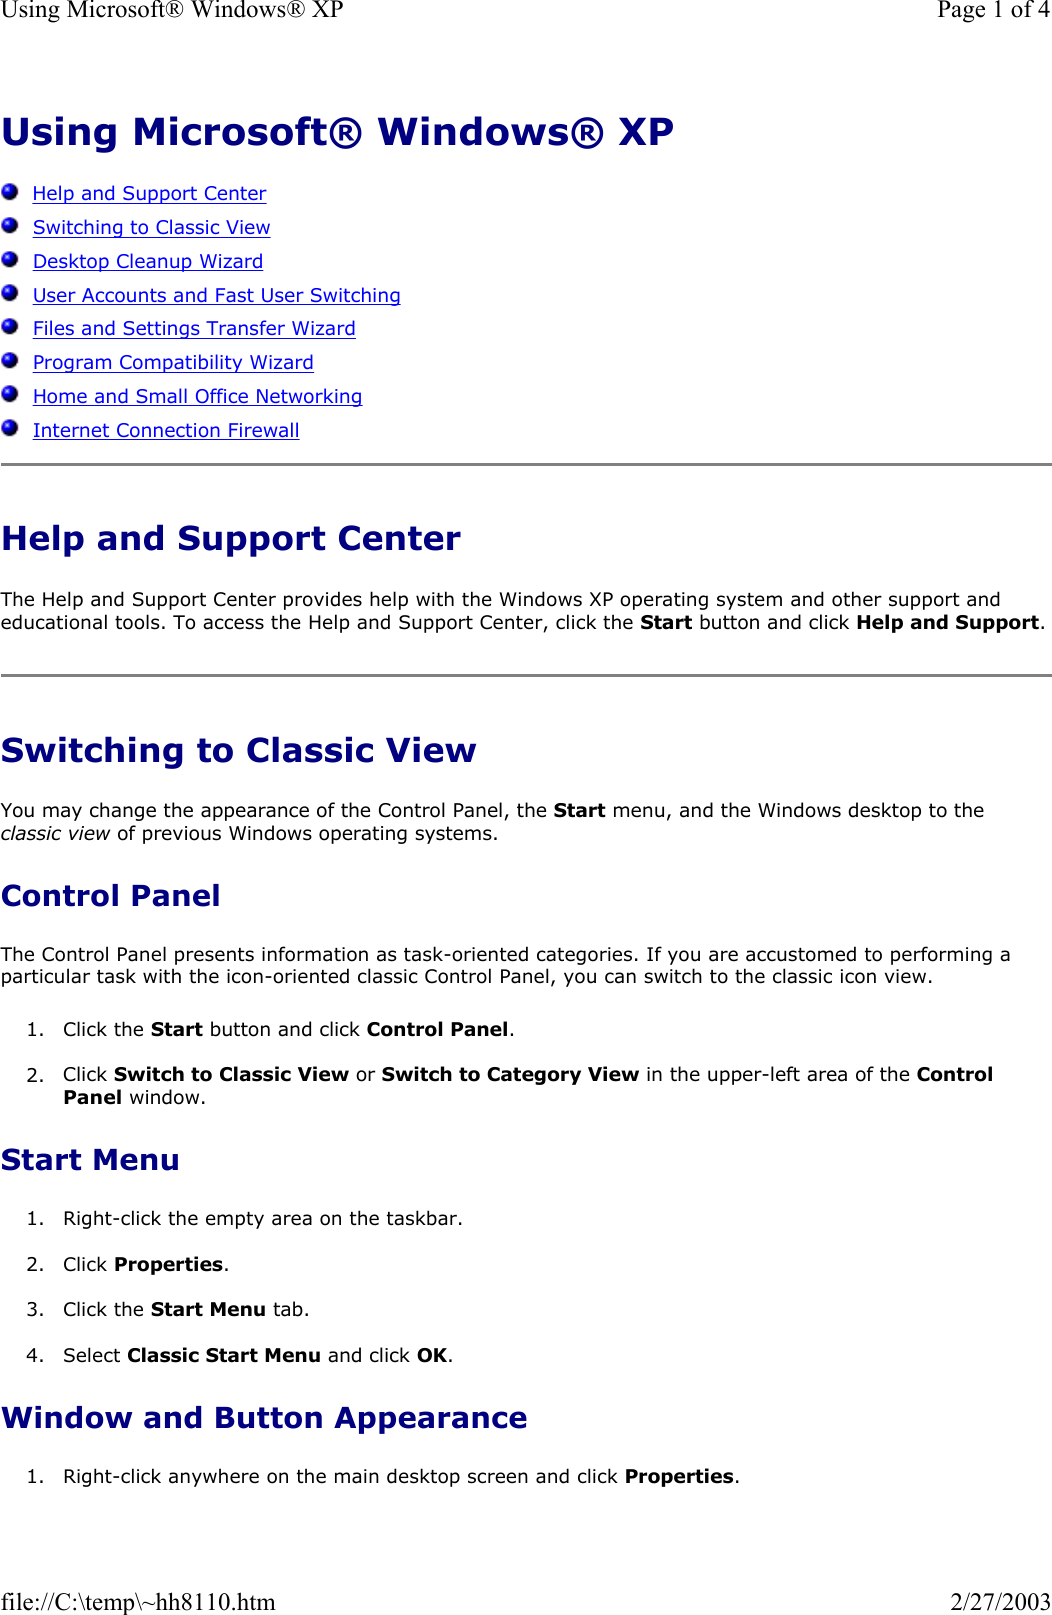 Using Microsoft® Windows® XP      Help and Support Center   Switching to Classic View   Desktop Cleanup Wizard   User Accounts and Fast User Switching   Files and Settings Transfer Wizard   Program Compatibility Wizard   Home and Small Office Networking   Internet Connection Firewall Help and Support Center The Help and Support Center provides help with the Windows XP operating system and other support and educational tools. To access the Help and Support Center, click the Start button and click Help and Support. Switching to Classic View You may change the appearance of the Control Panel, the Start menu, and the Windows desktop to the classic view of previous Windows operating systems. Control Panel The Control Panel presents information as task-oriented categories. If you are accustomed to performing a particular task with the icon-oriented classic Control Panel, you can switch to the classic icon view. 1. Click the Start button and click Control Panel.   2. Click Switch to Classic View or Switch to Category View in the upper-left area of the Control Panel window.   Start Menu 1. Right-click the empty area on the taskbar.  2. Click Properties.  3. Click the Start Menu tab.  4. Select Classic Start Menu and click OK.  Window and Button Appearance 1. Right-click anywhere on the main desktop screen and click Properties.  Page 1 of 4Using Microsoft® Windows® XP2/27/2003file://C:\temp\~hh8110.htm